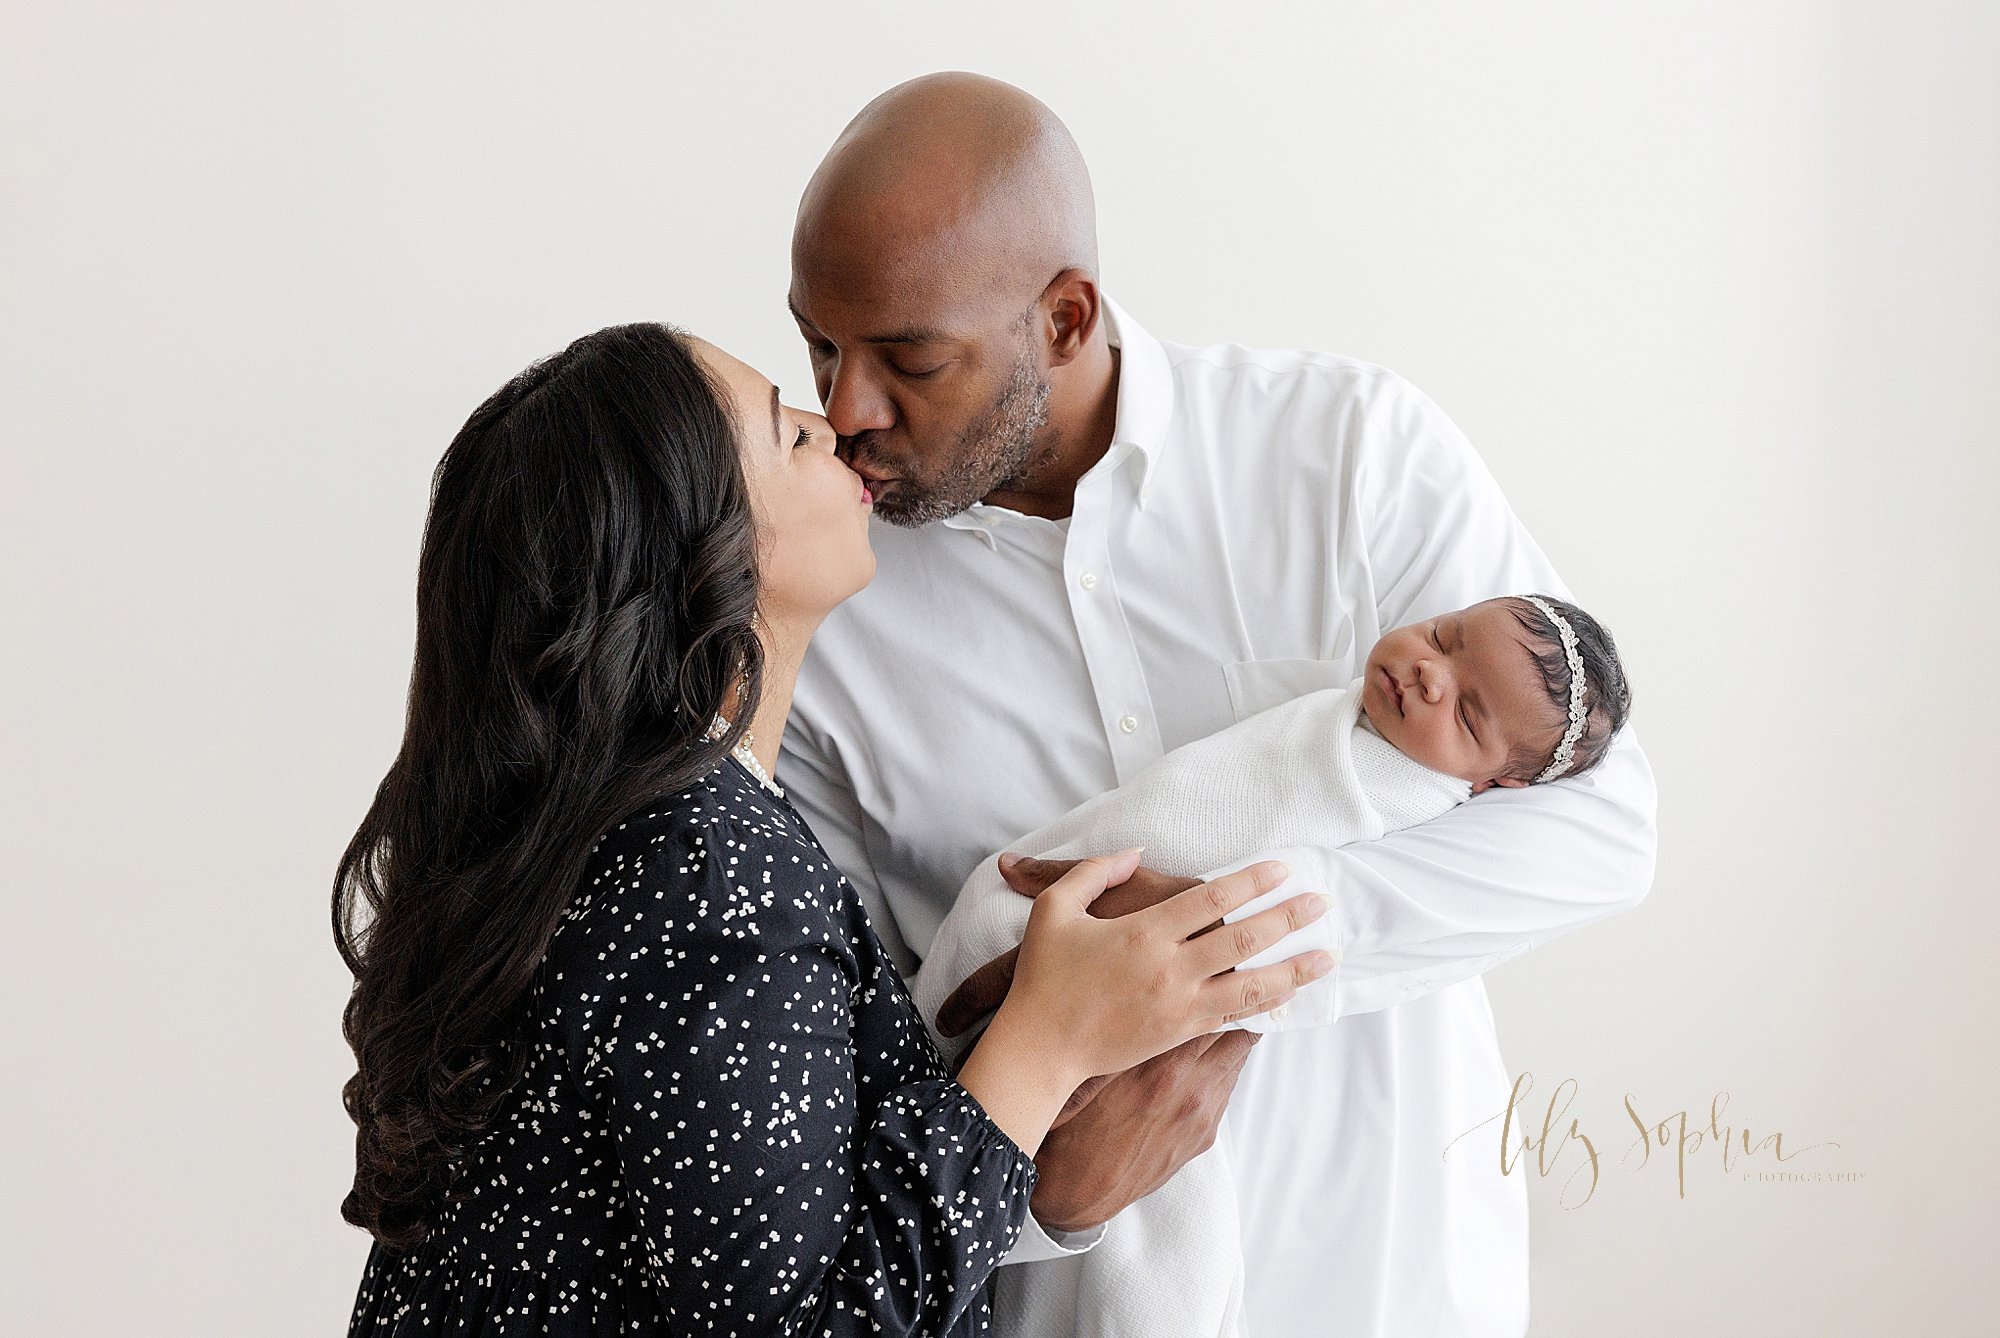  The love of a husband and wife is captured in this newborn photo of a father cradling his newborn daughter in his left arm as his wife stands next to him and the two of them kiss taken near Smyrna in Atlanta in a studio using natural light. 